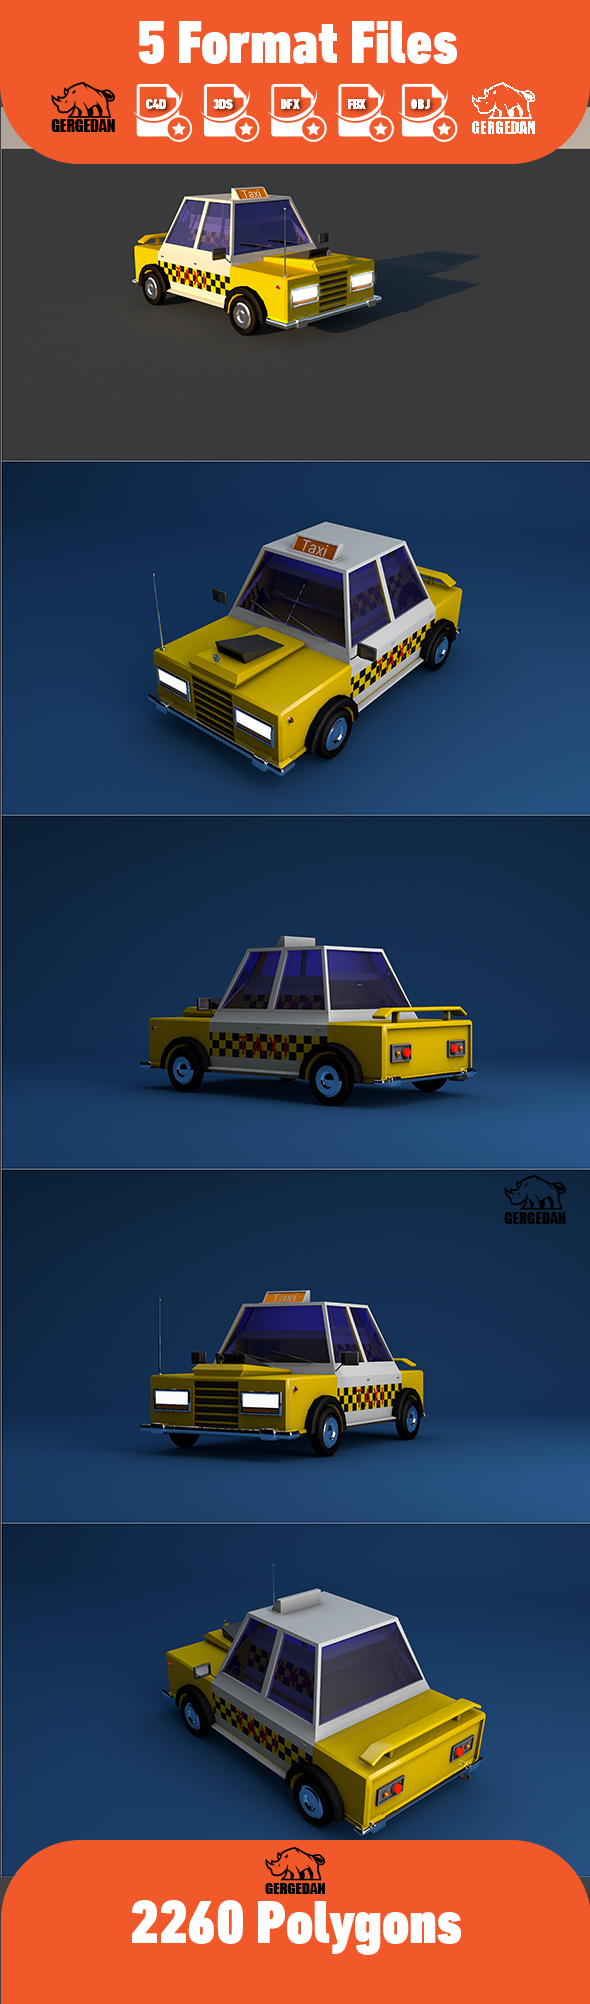 Low Poly Taxi - 3Docean 23267551